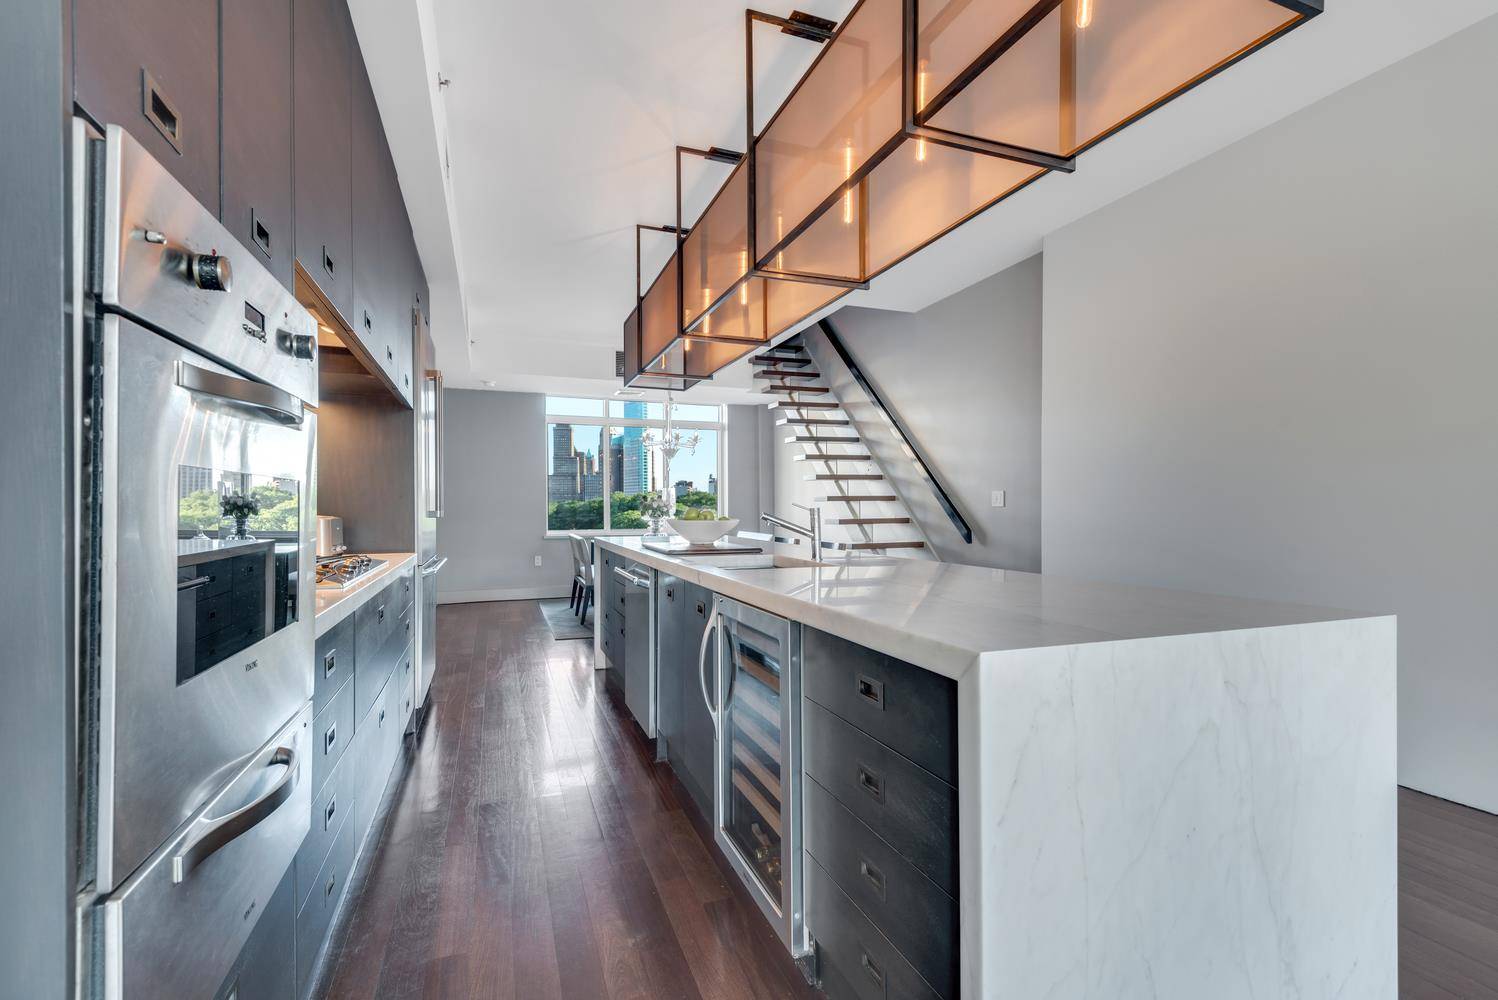 ALL SHOWINGS AND OPEN HOUSES ARE BY APPOINTMENT ONLY Enjoy 5 star penthouse living at the coveted Nexus, a modern boutique condominium located on the main drag of Dumbo at ...